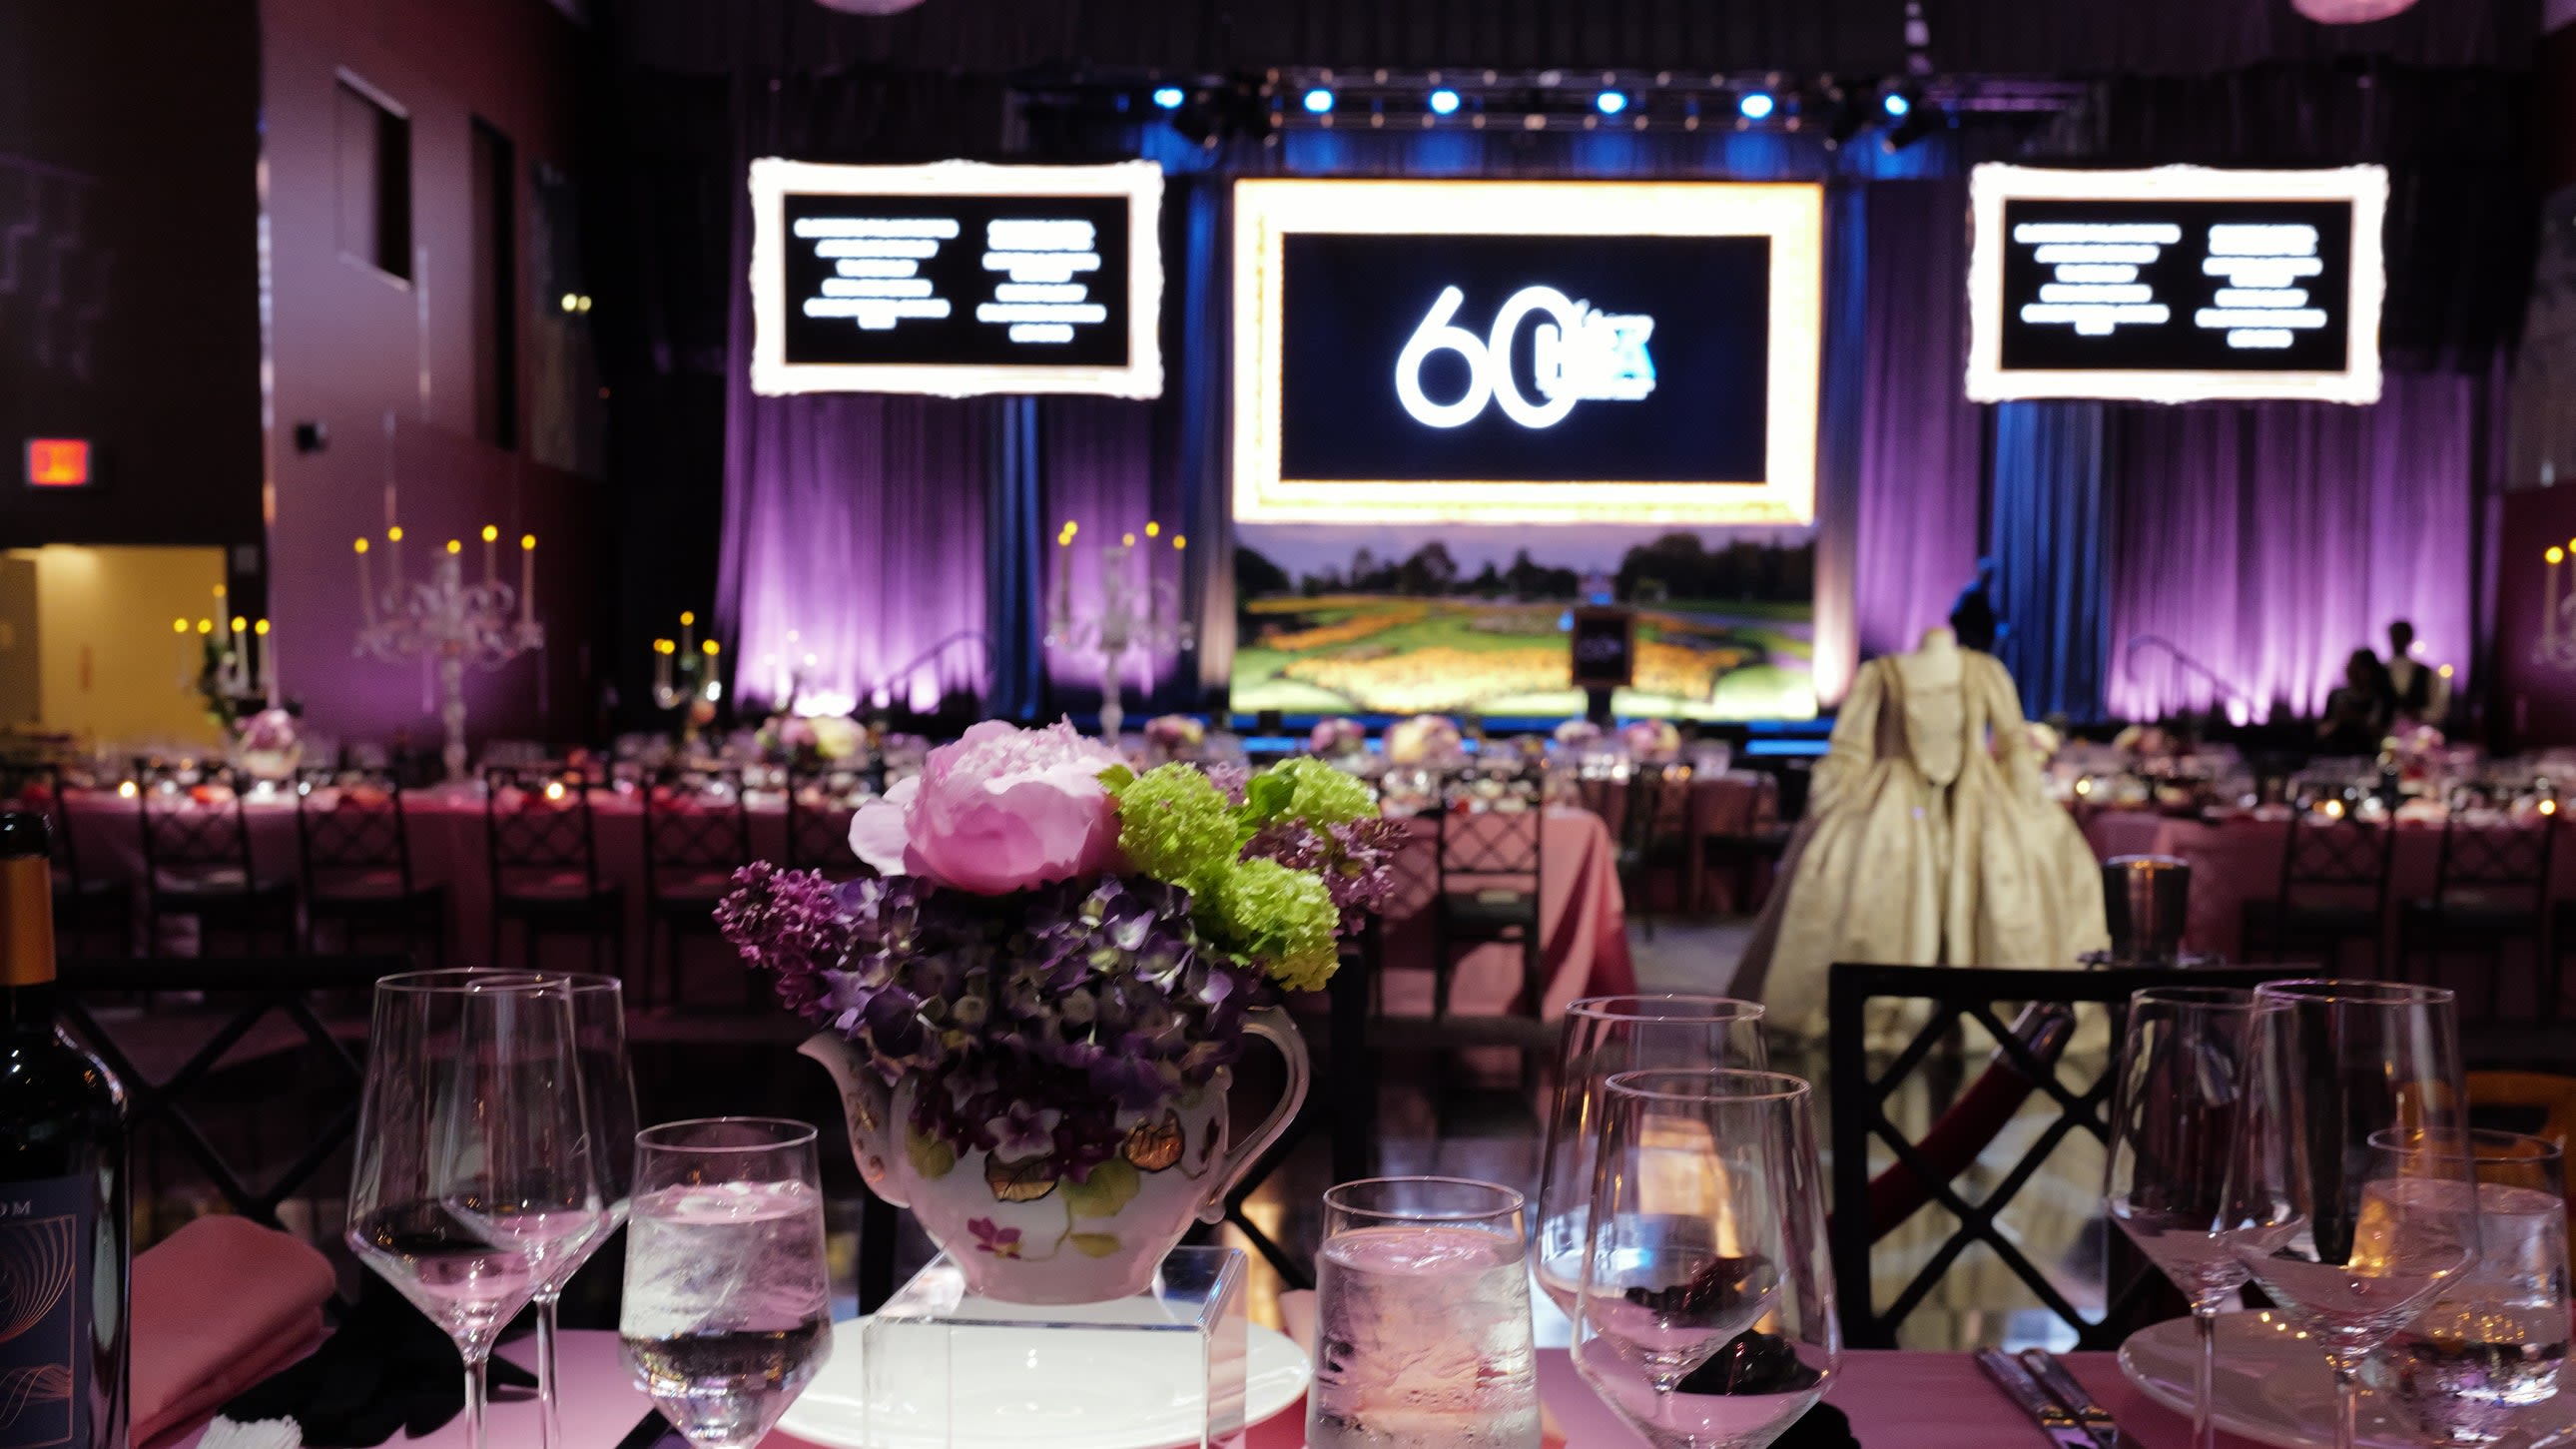 A Bridgerton Affair! Harlem School of the Arts's 60th Anniversary Gala Honors the Legacy of Founder Dorothy Maynor